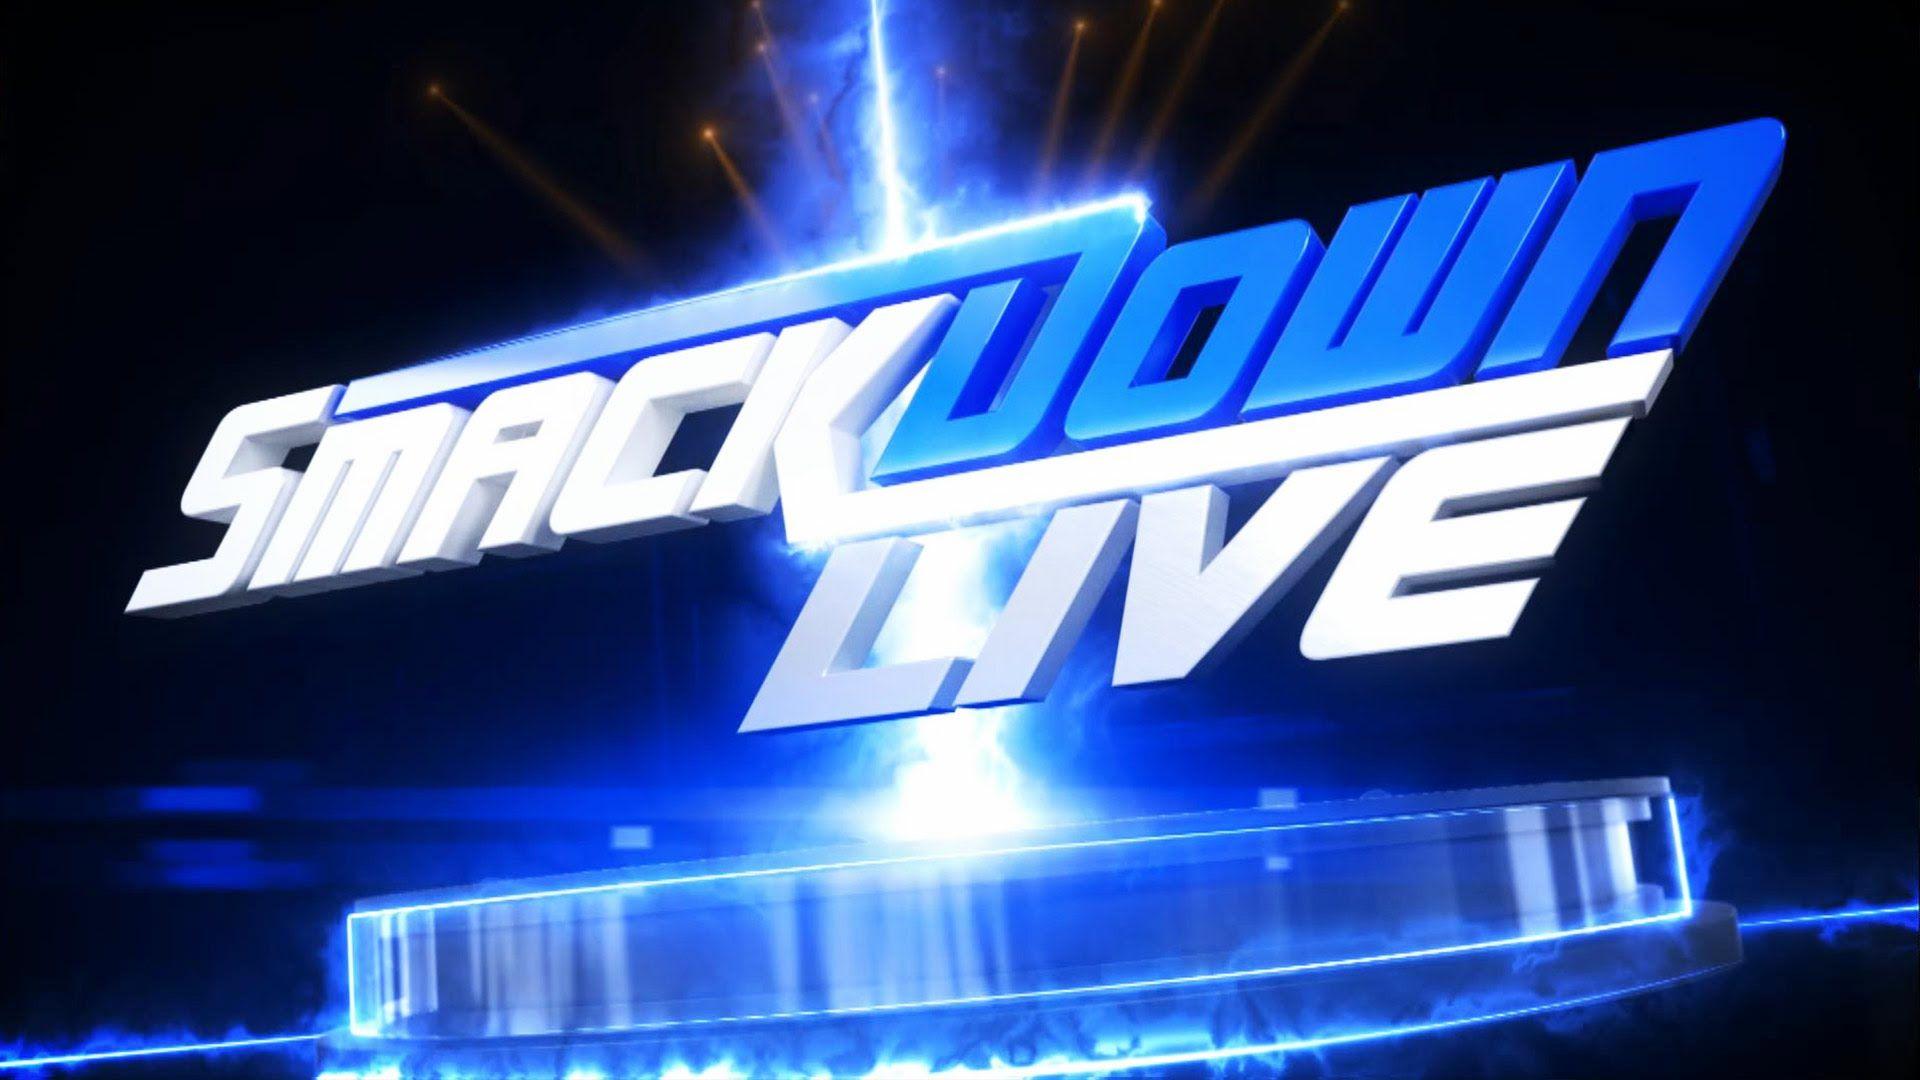 Wwe smackdown backgrounds